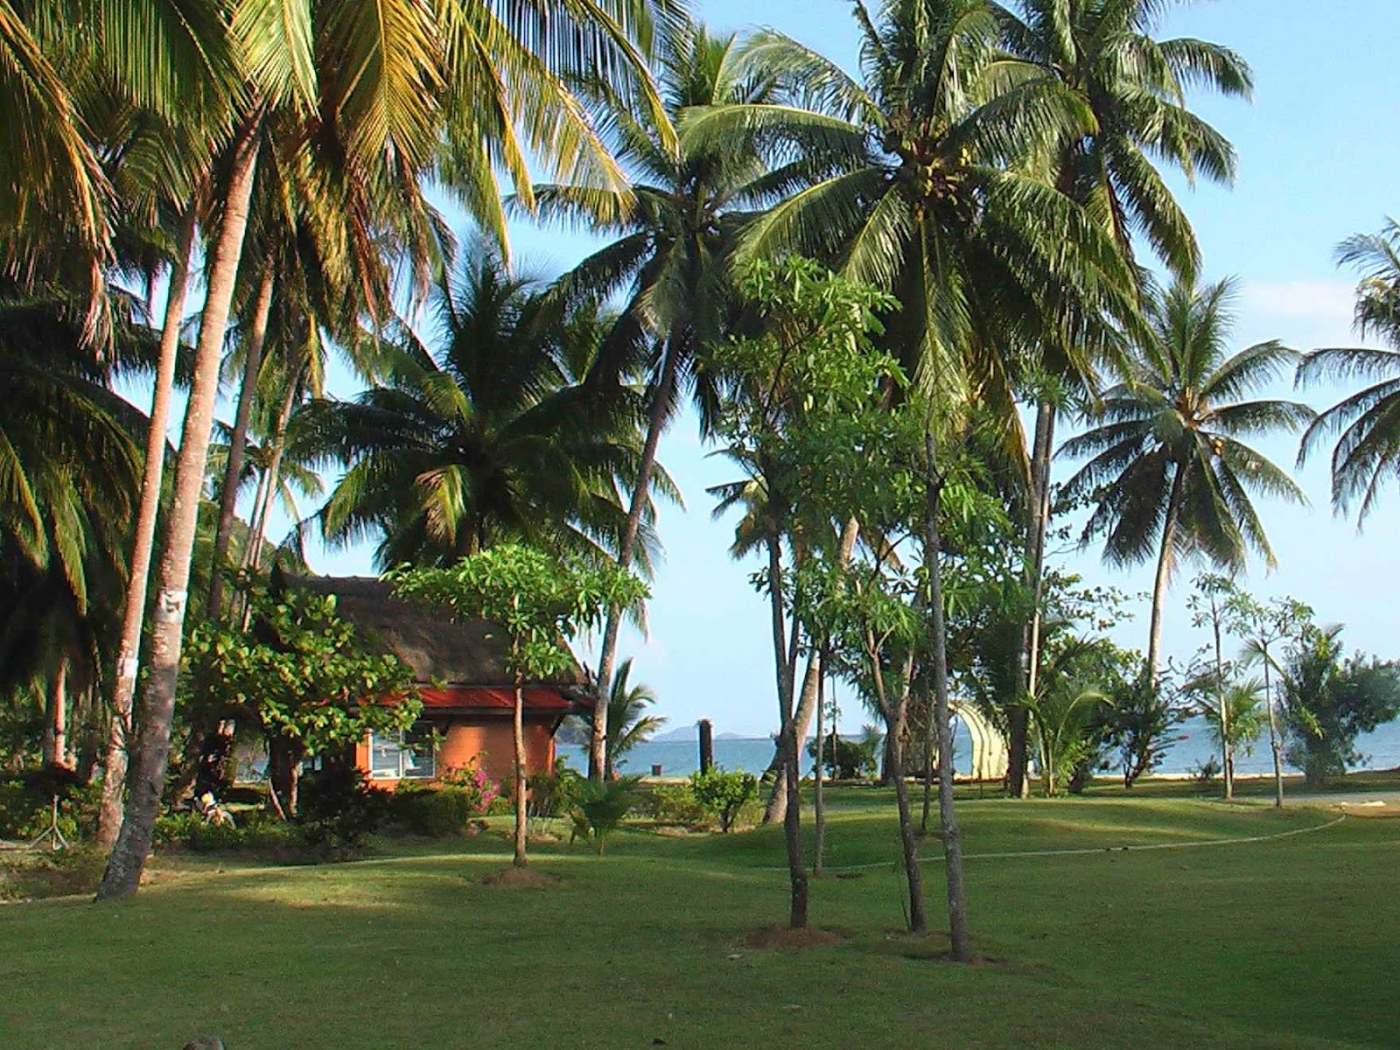 Palm trees on the coast of the island of Koh Chang, Thailand